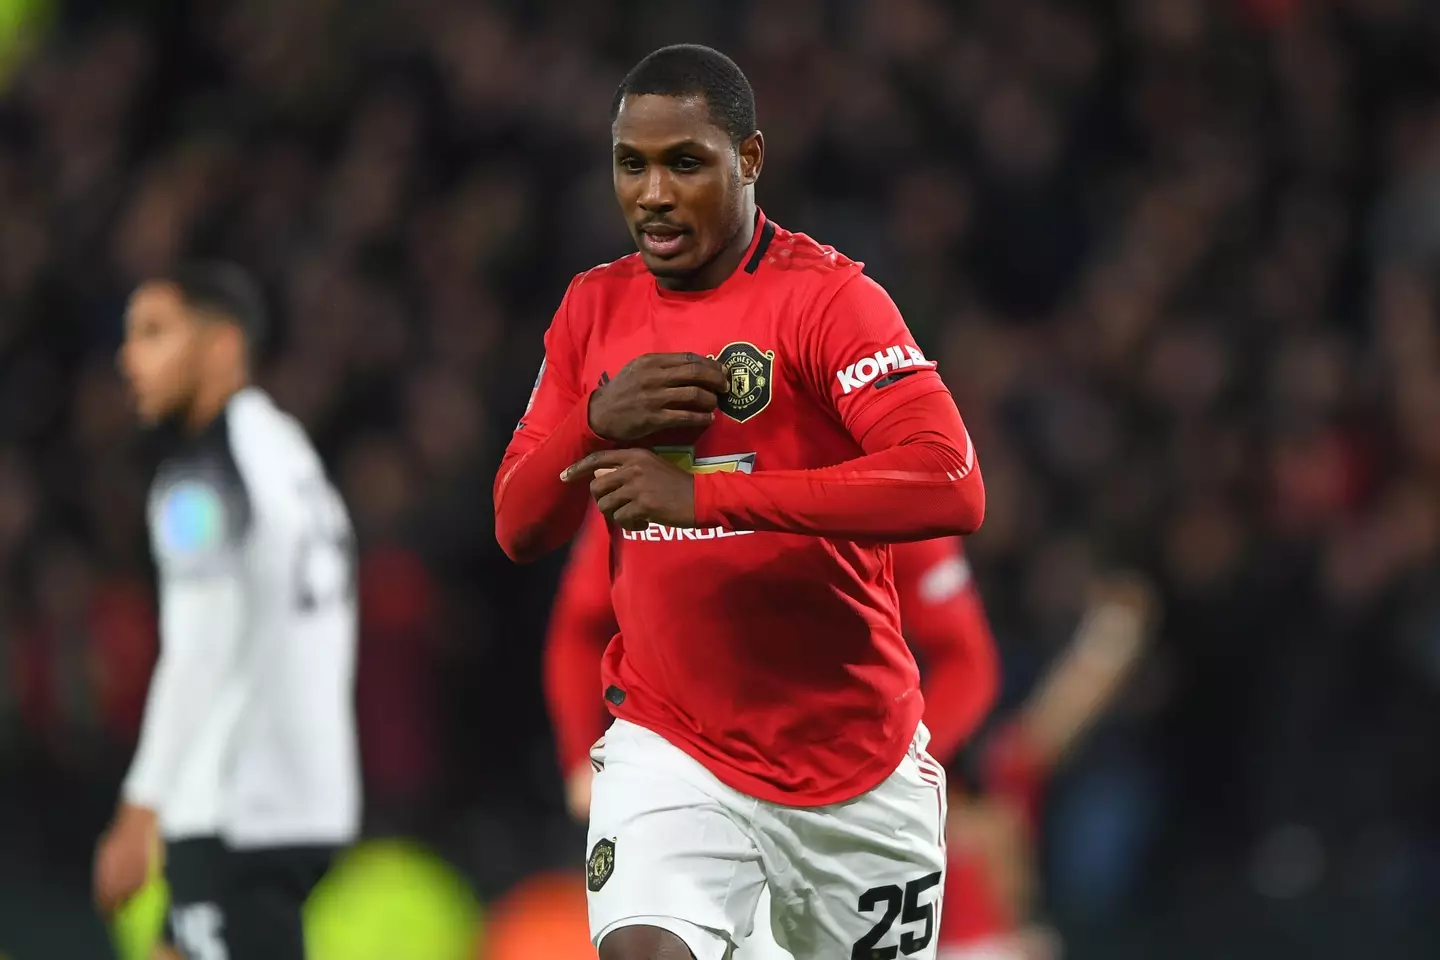 United fan Ighalo was indicative of the club's poor planning. Image: Alamy